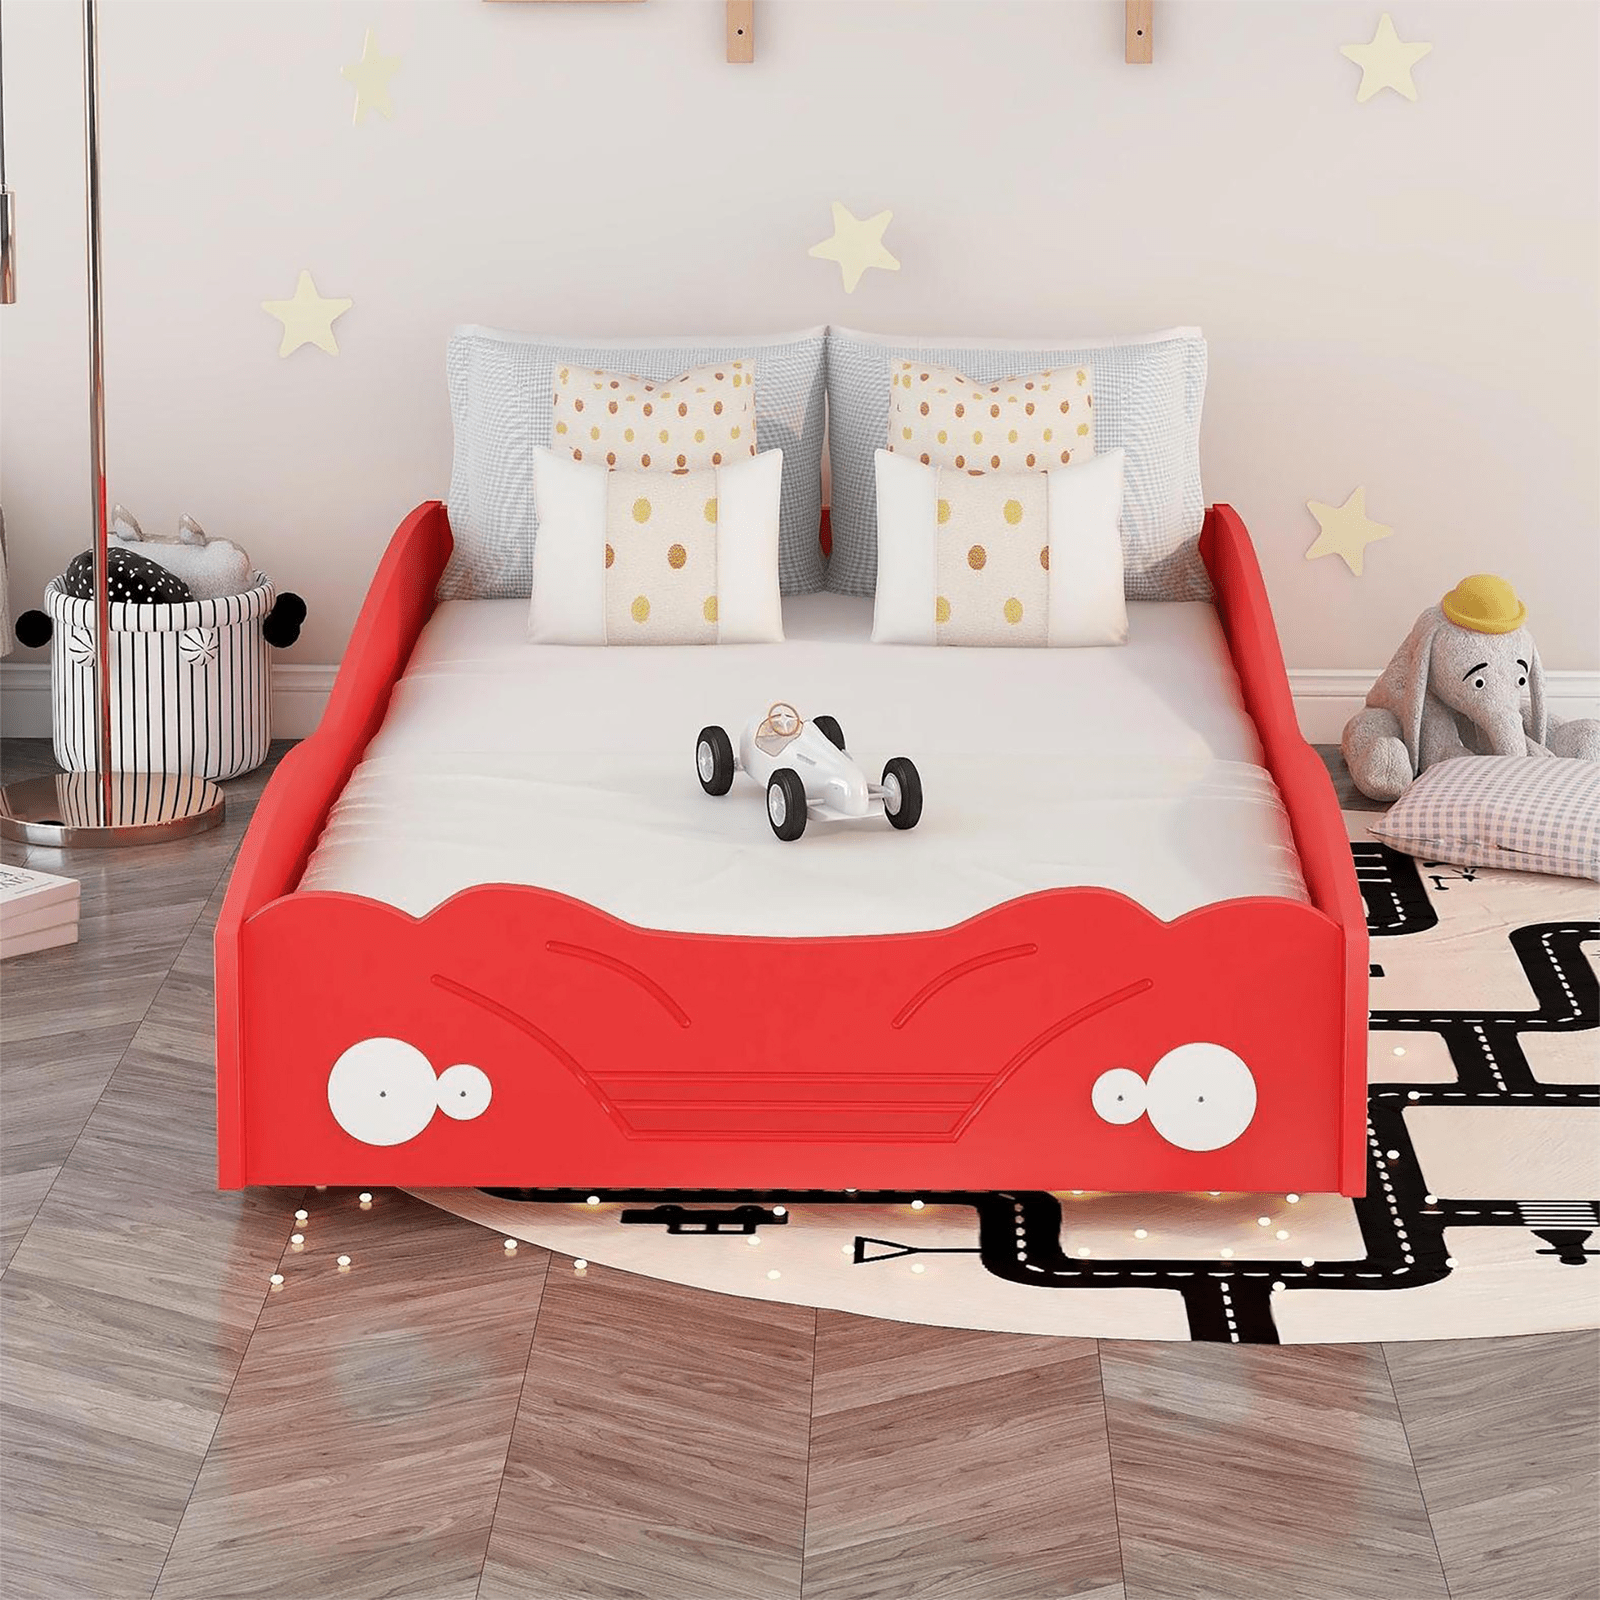 Twin Size Car-Shaped Platform Bed, Red